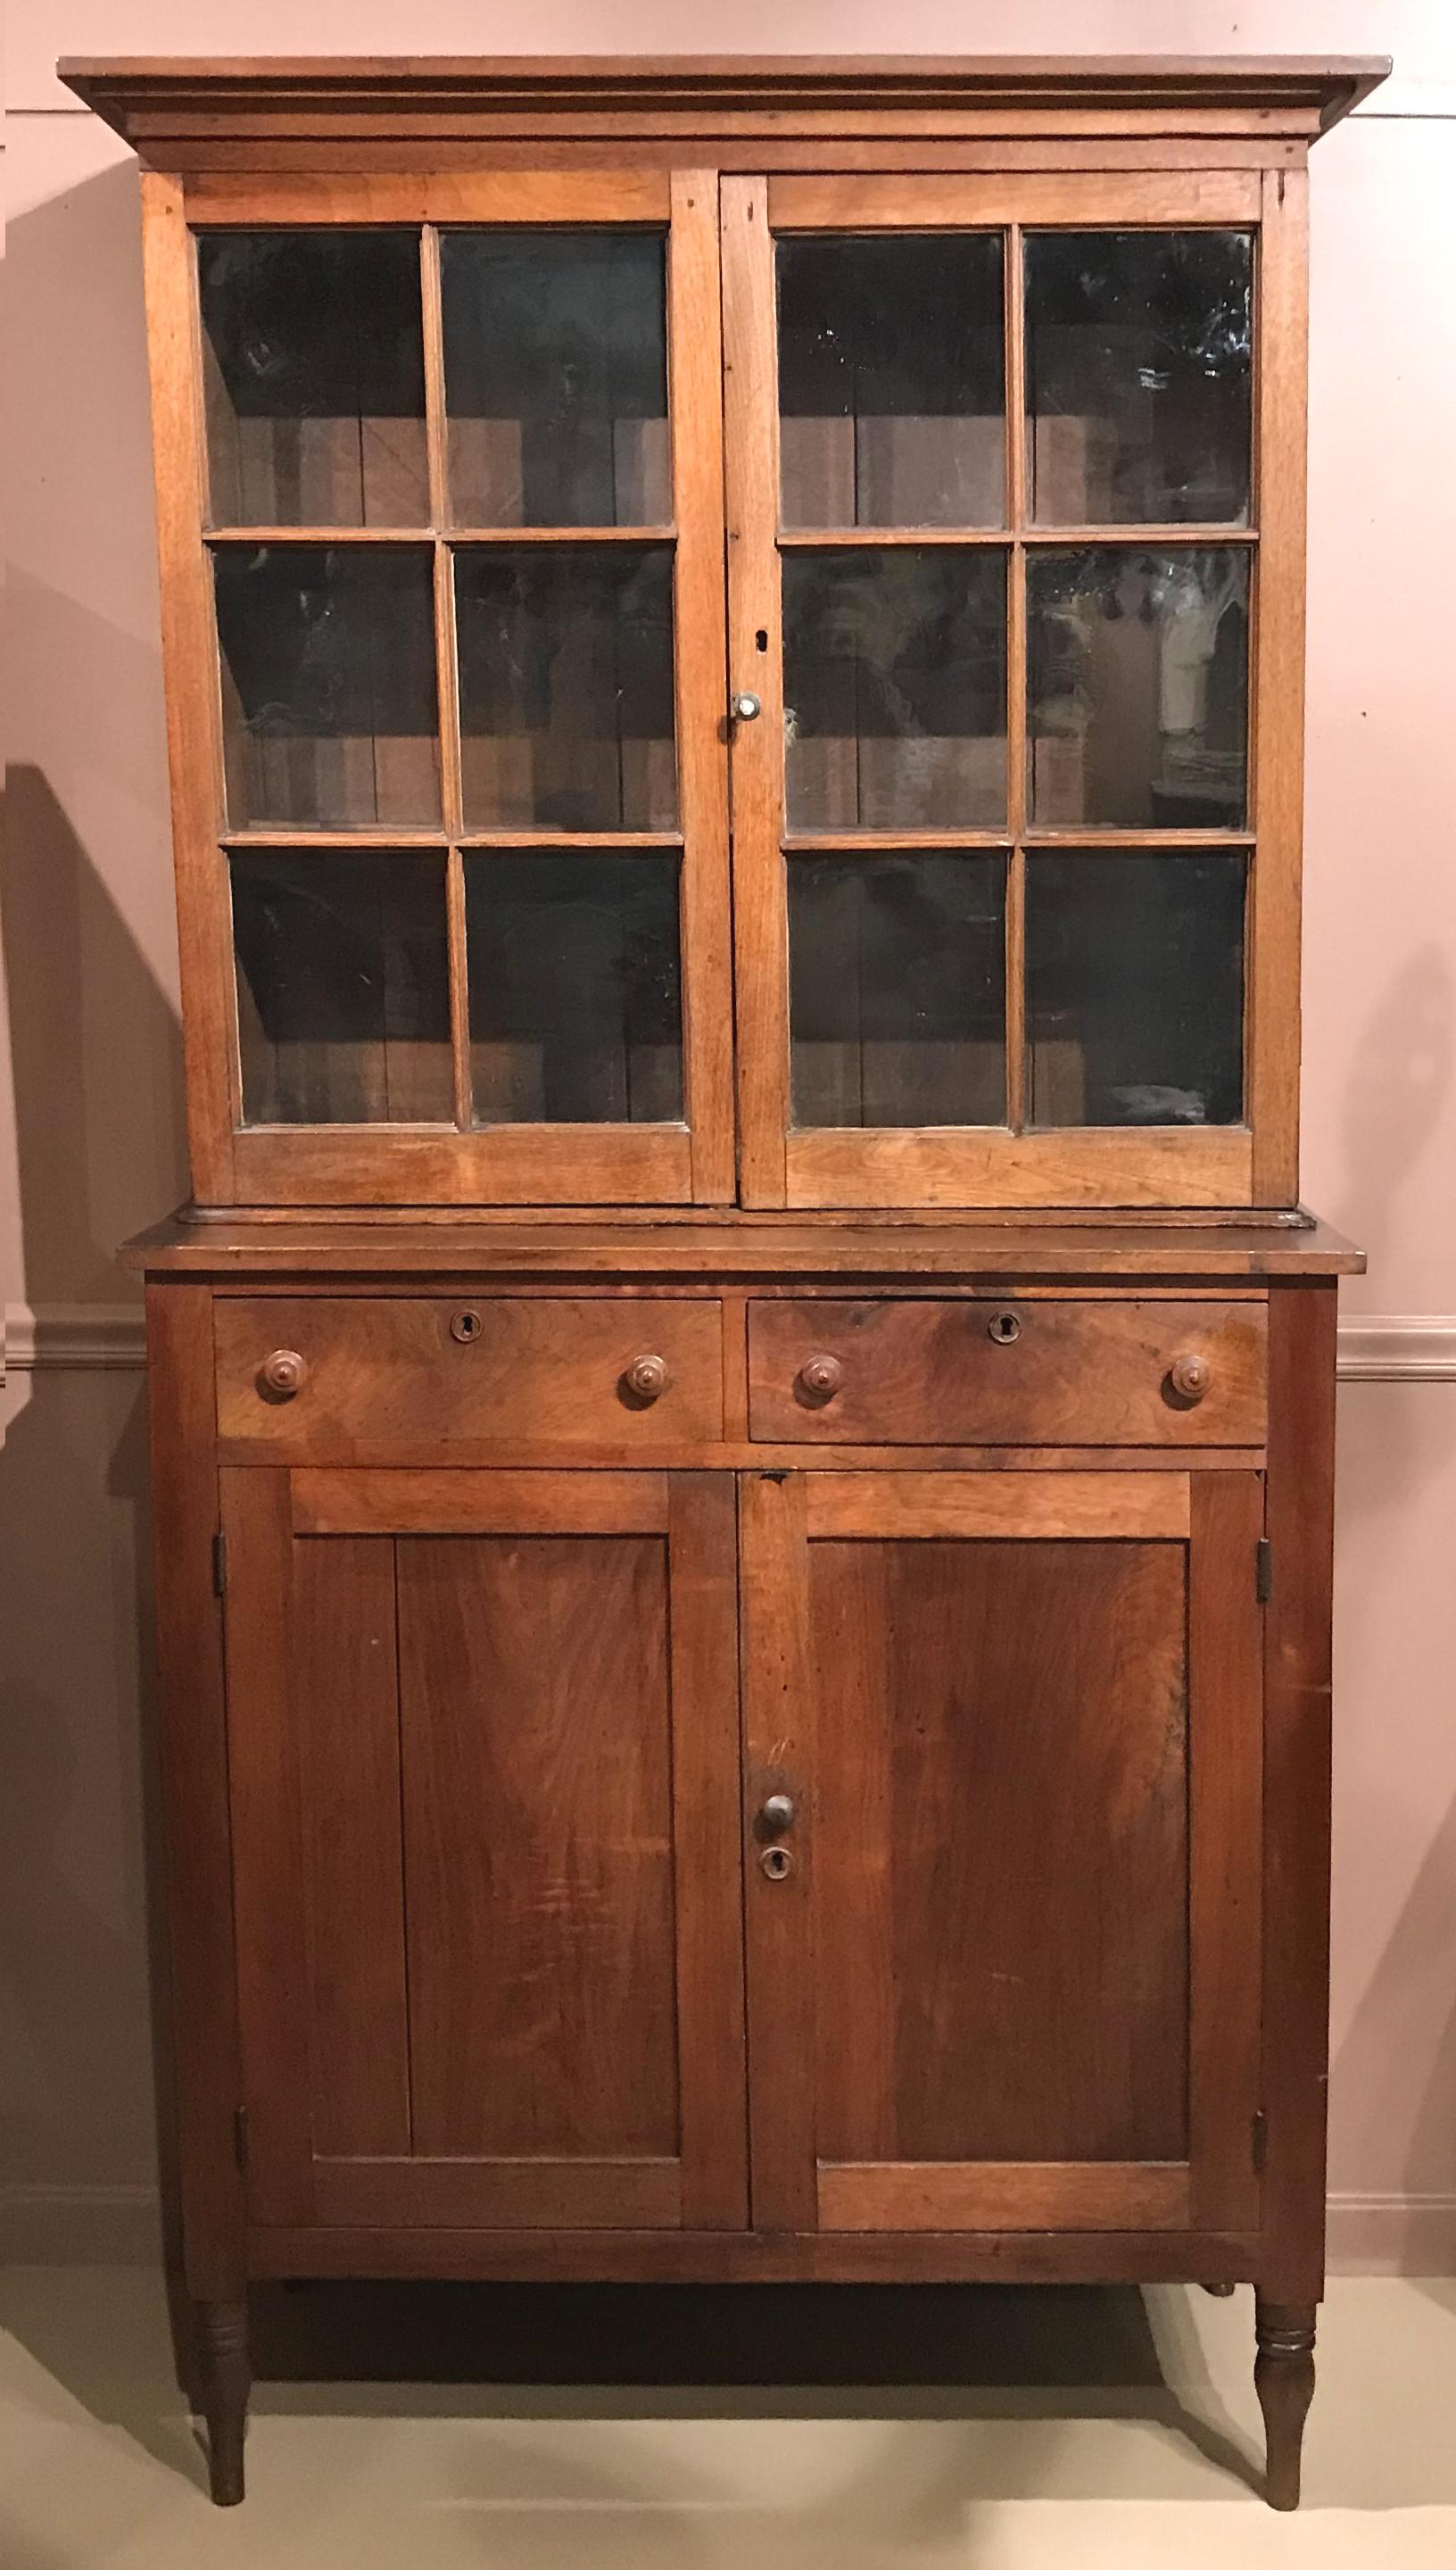 A rare, married step back walnut pie safe cupboard with glazed doors, probably from Virginia, early 19th century. The upper section with cornice molding and two 6 pane glazed doors surmounting a lower case with two drawers over two doors and ends